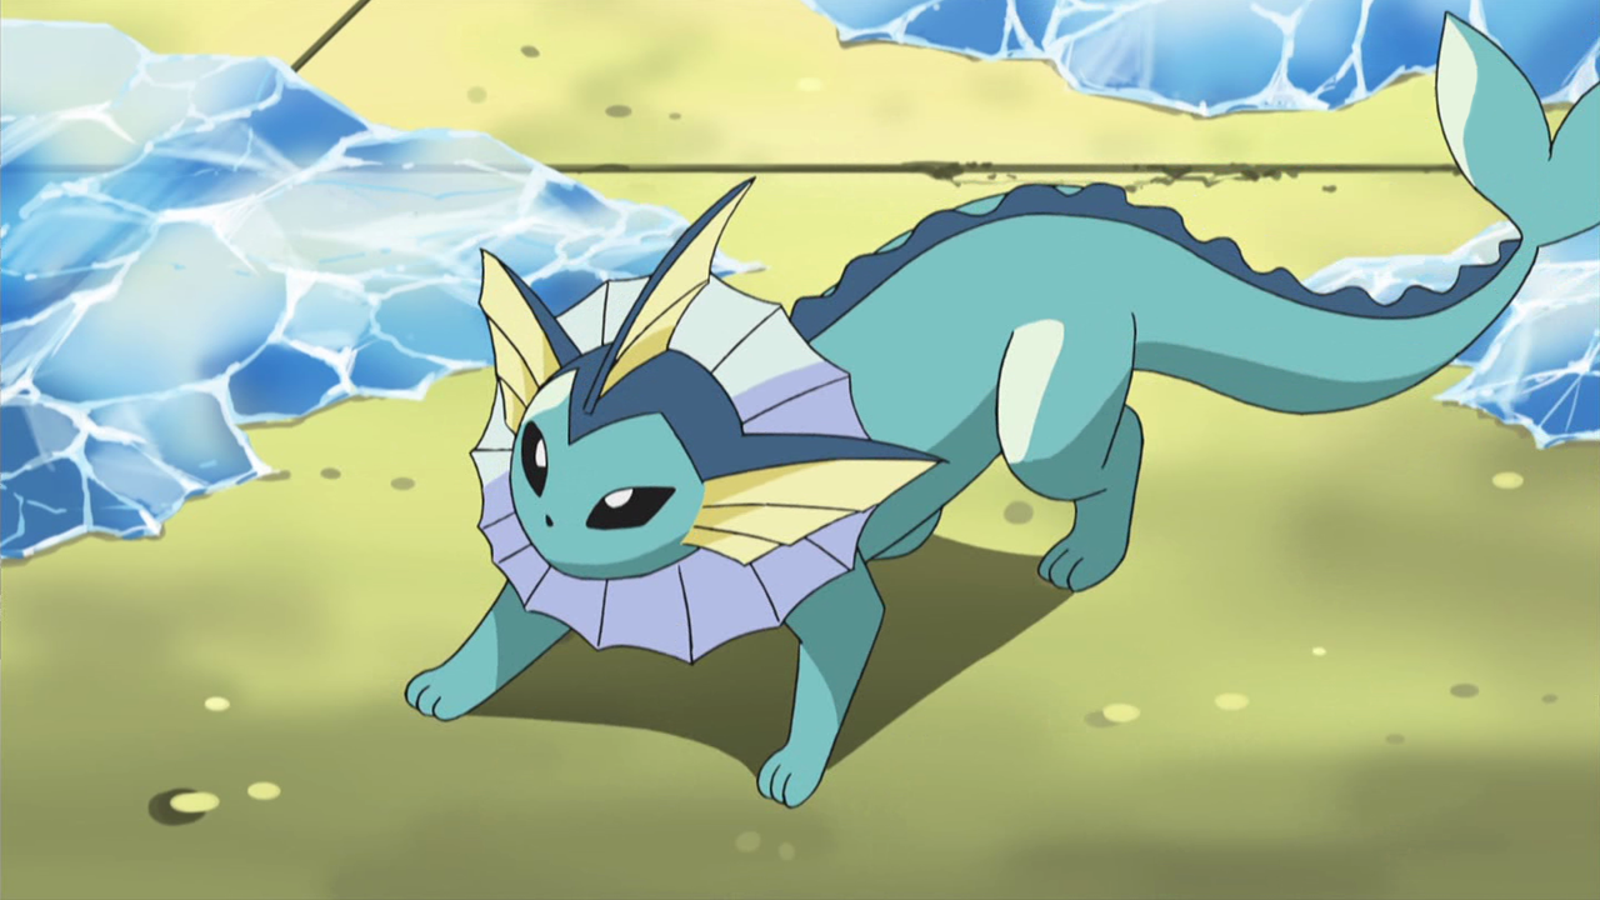 The Best Pokémon Go Players Are Obsessed With Vaporeon